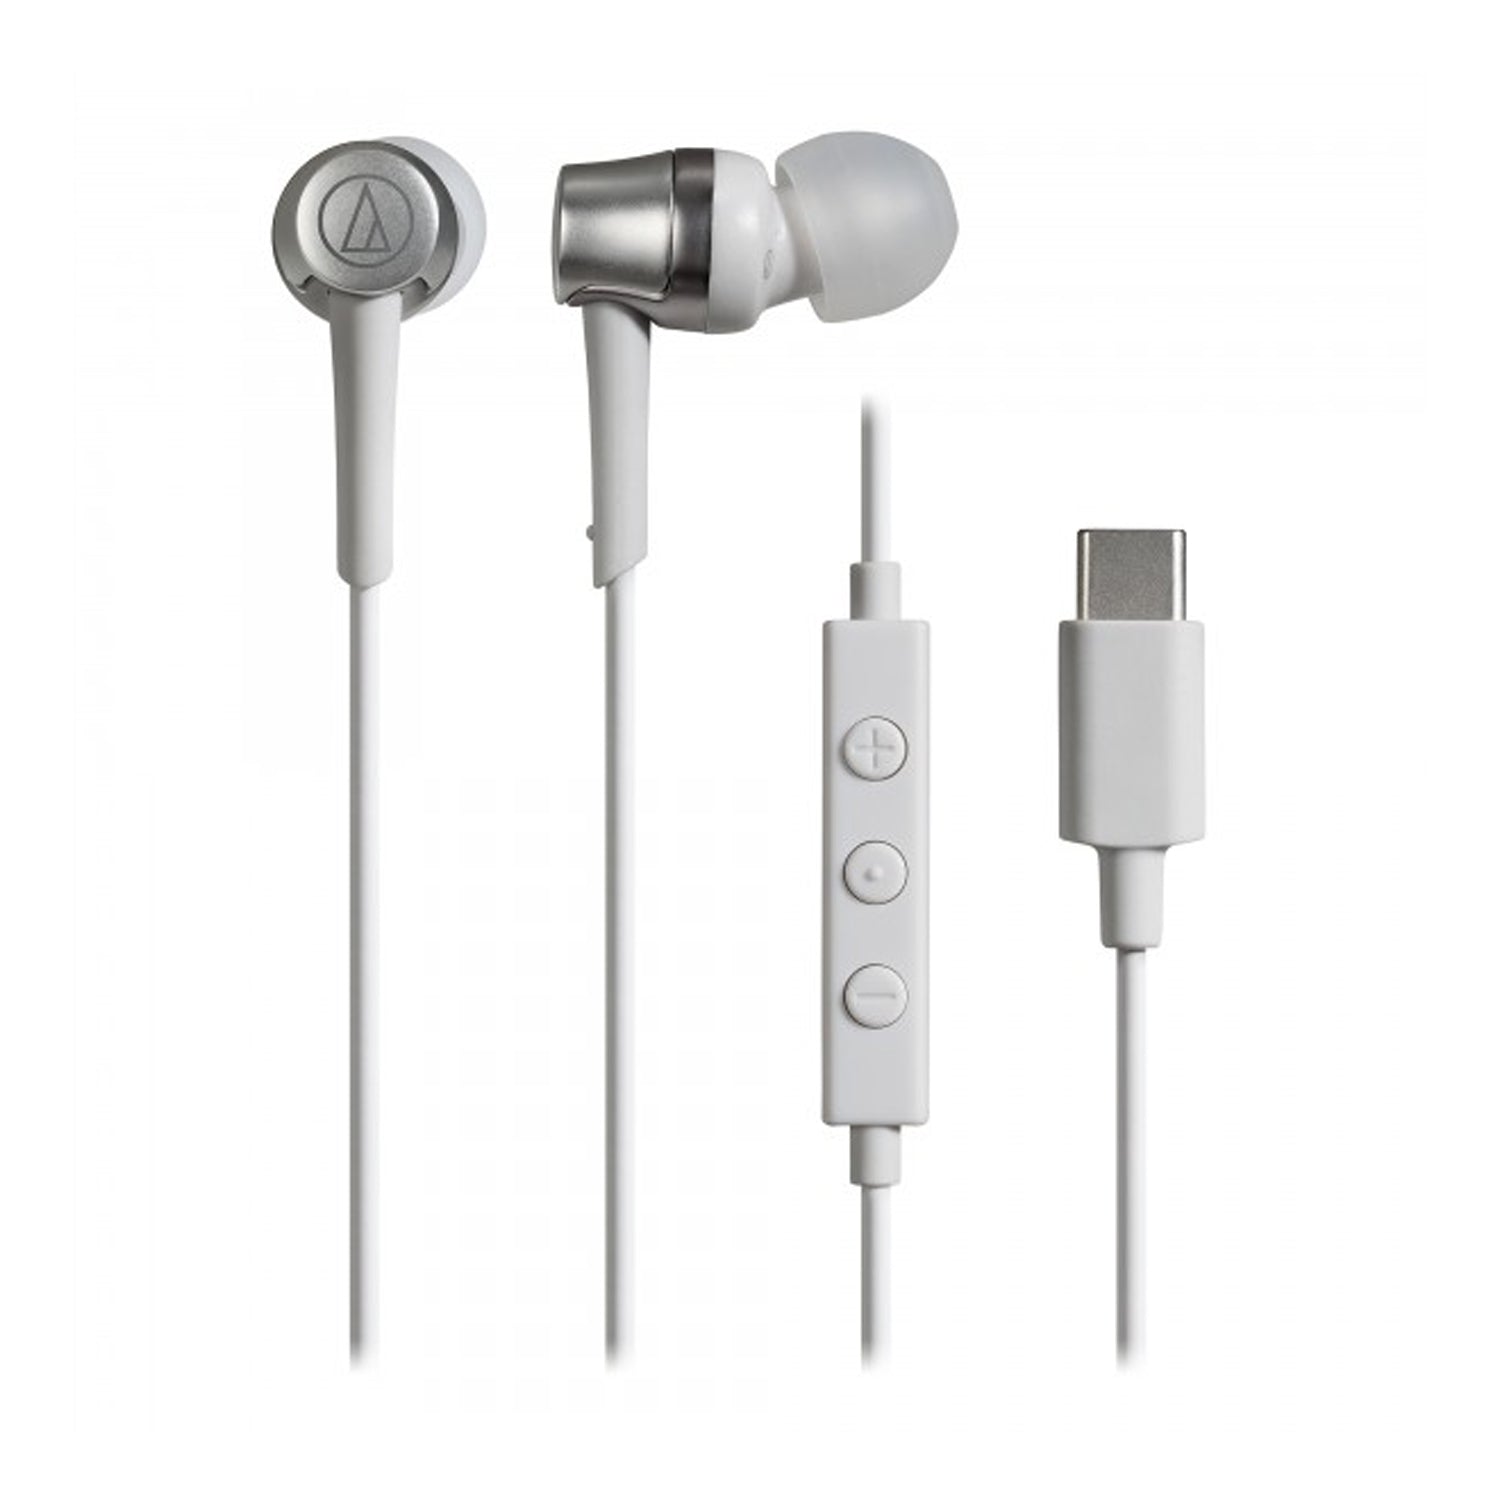 Audio-Technica ATH-CKD3C USB Type-C In-Ear Earbuds